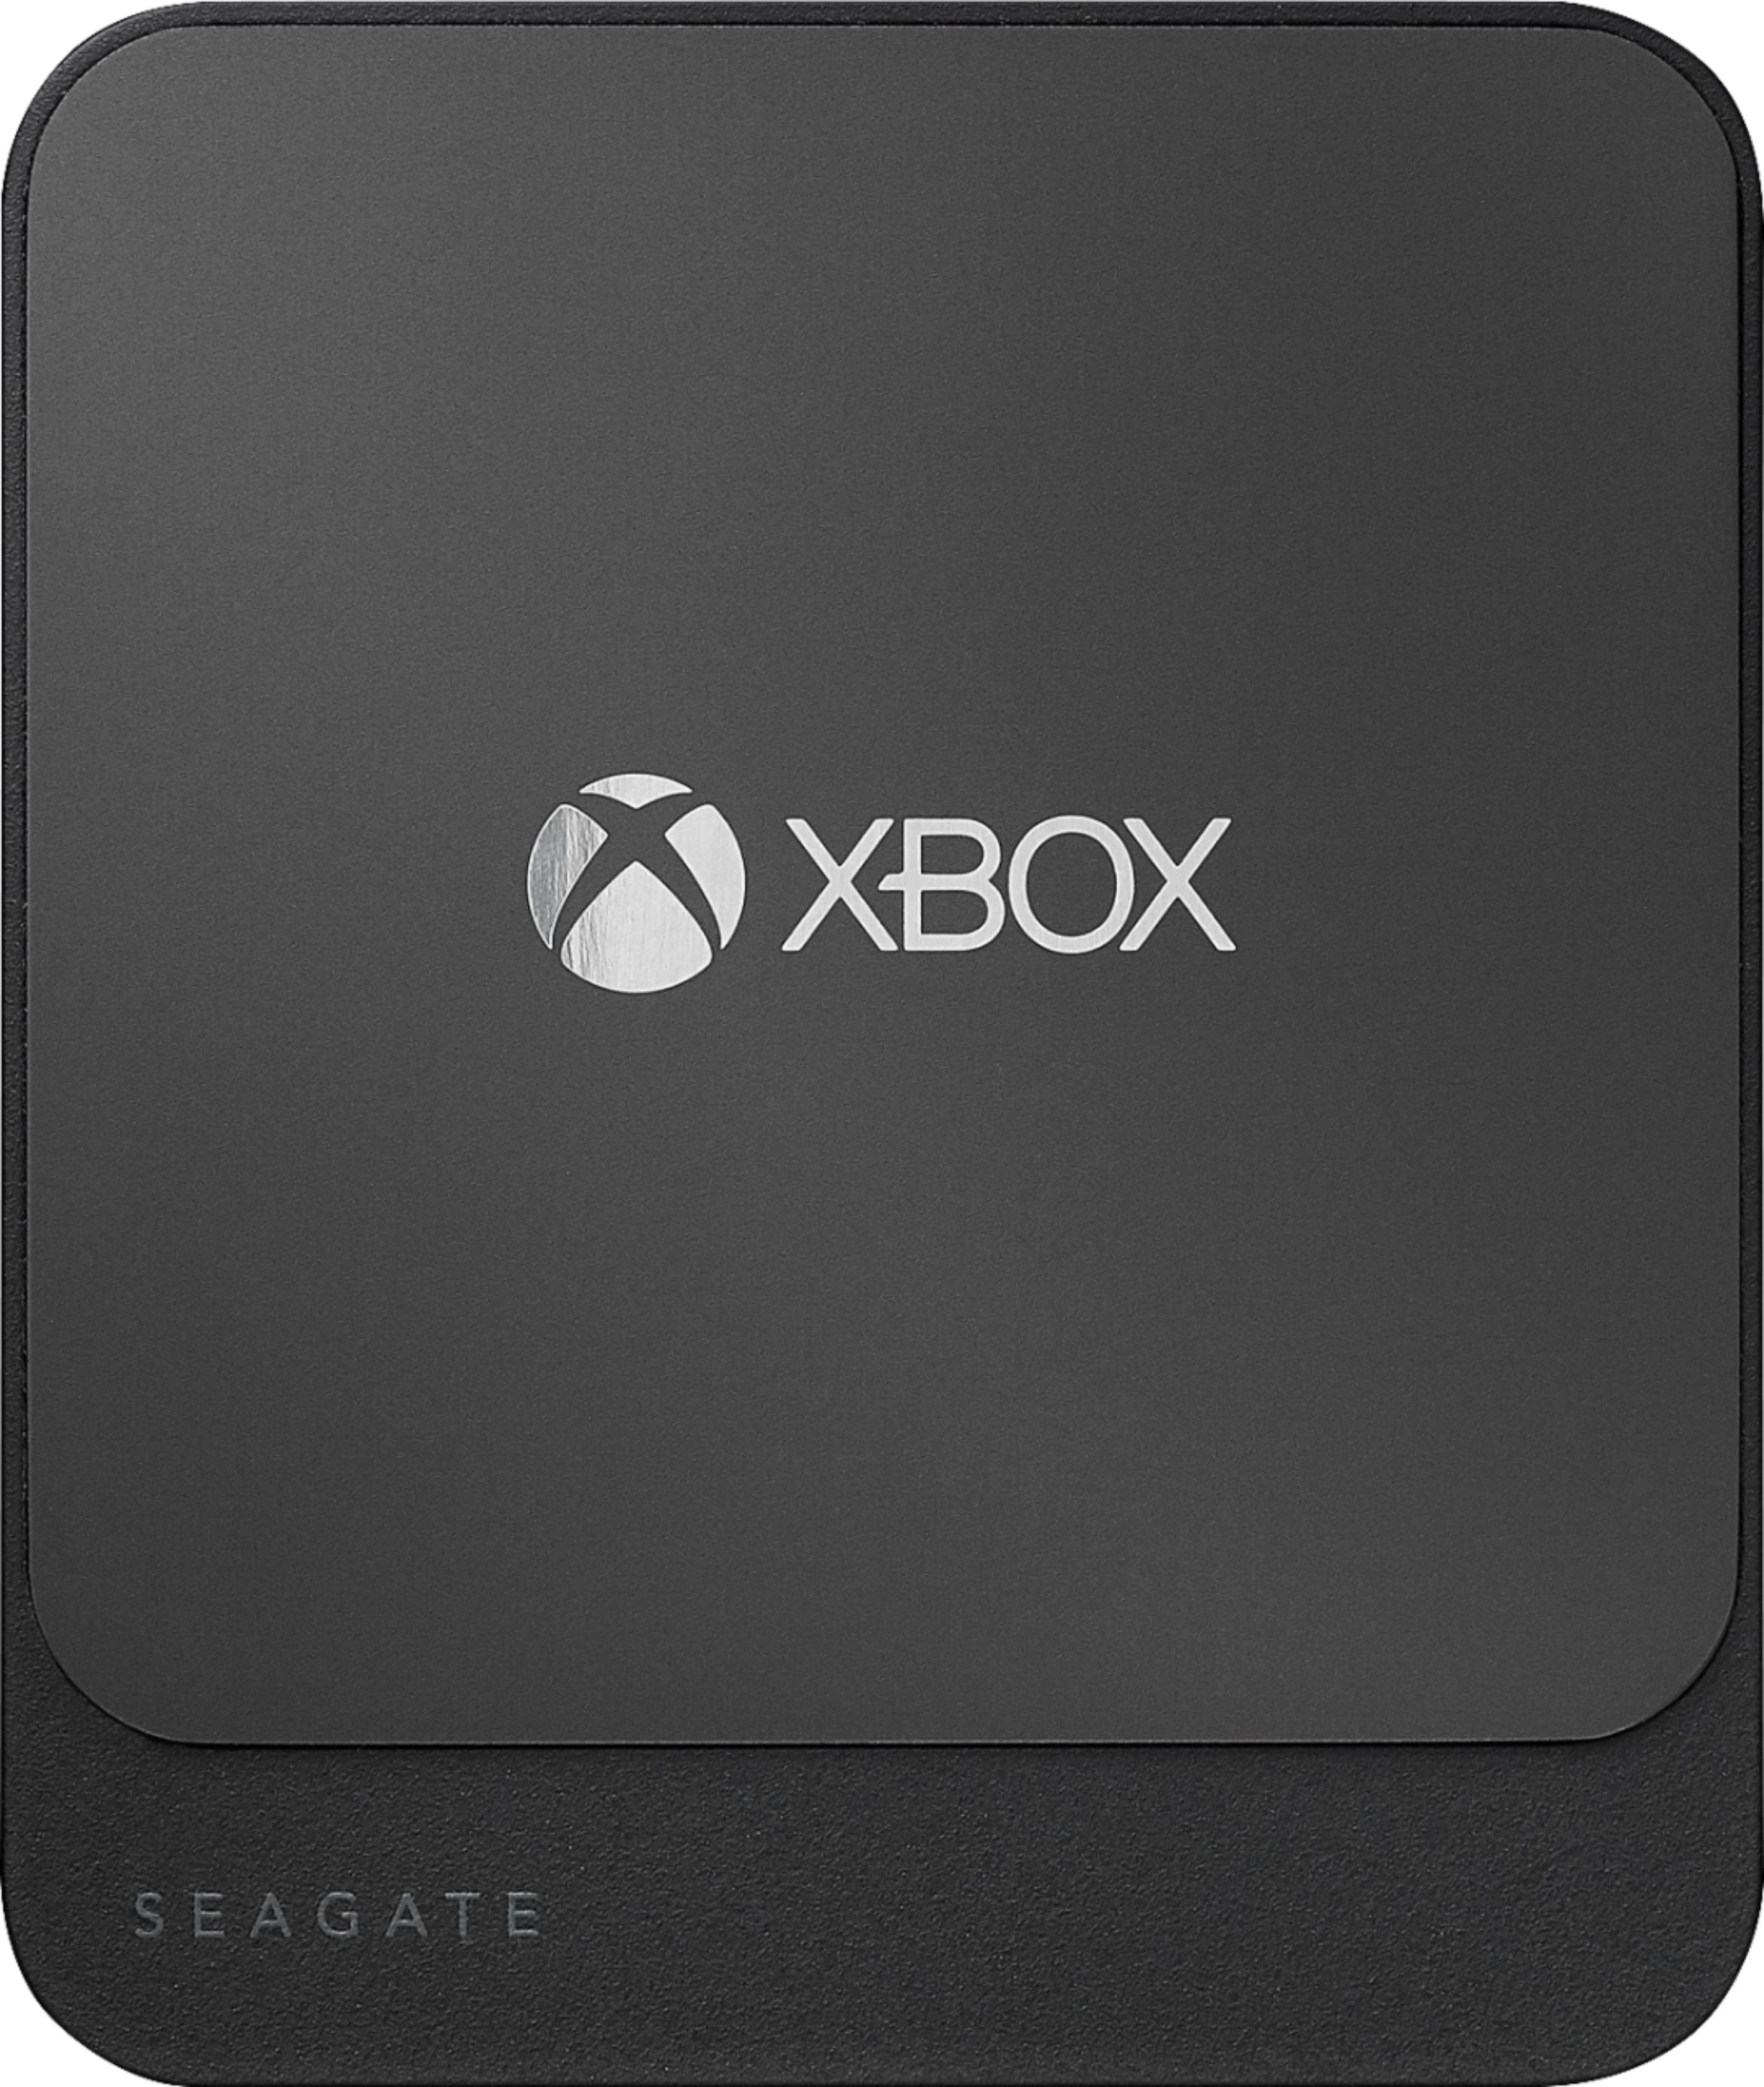 Seagate Game Drive for Xbox Officially Licensed 1TB External USB 3.0 Portable Solid State Drive- Black - Black